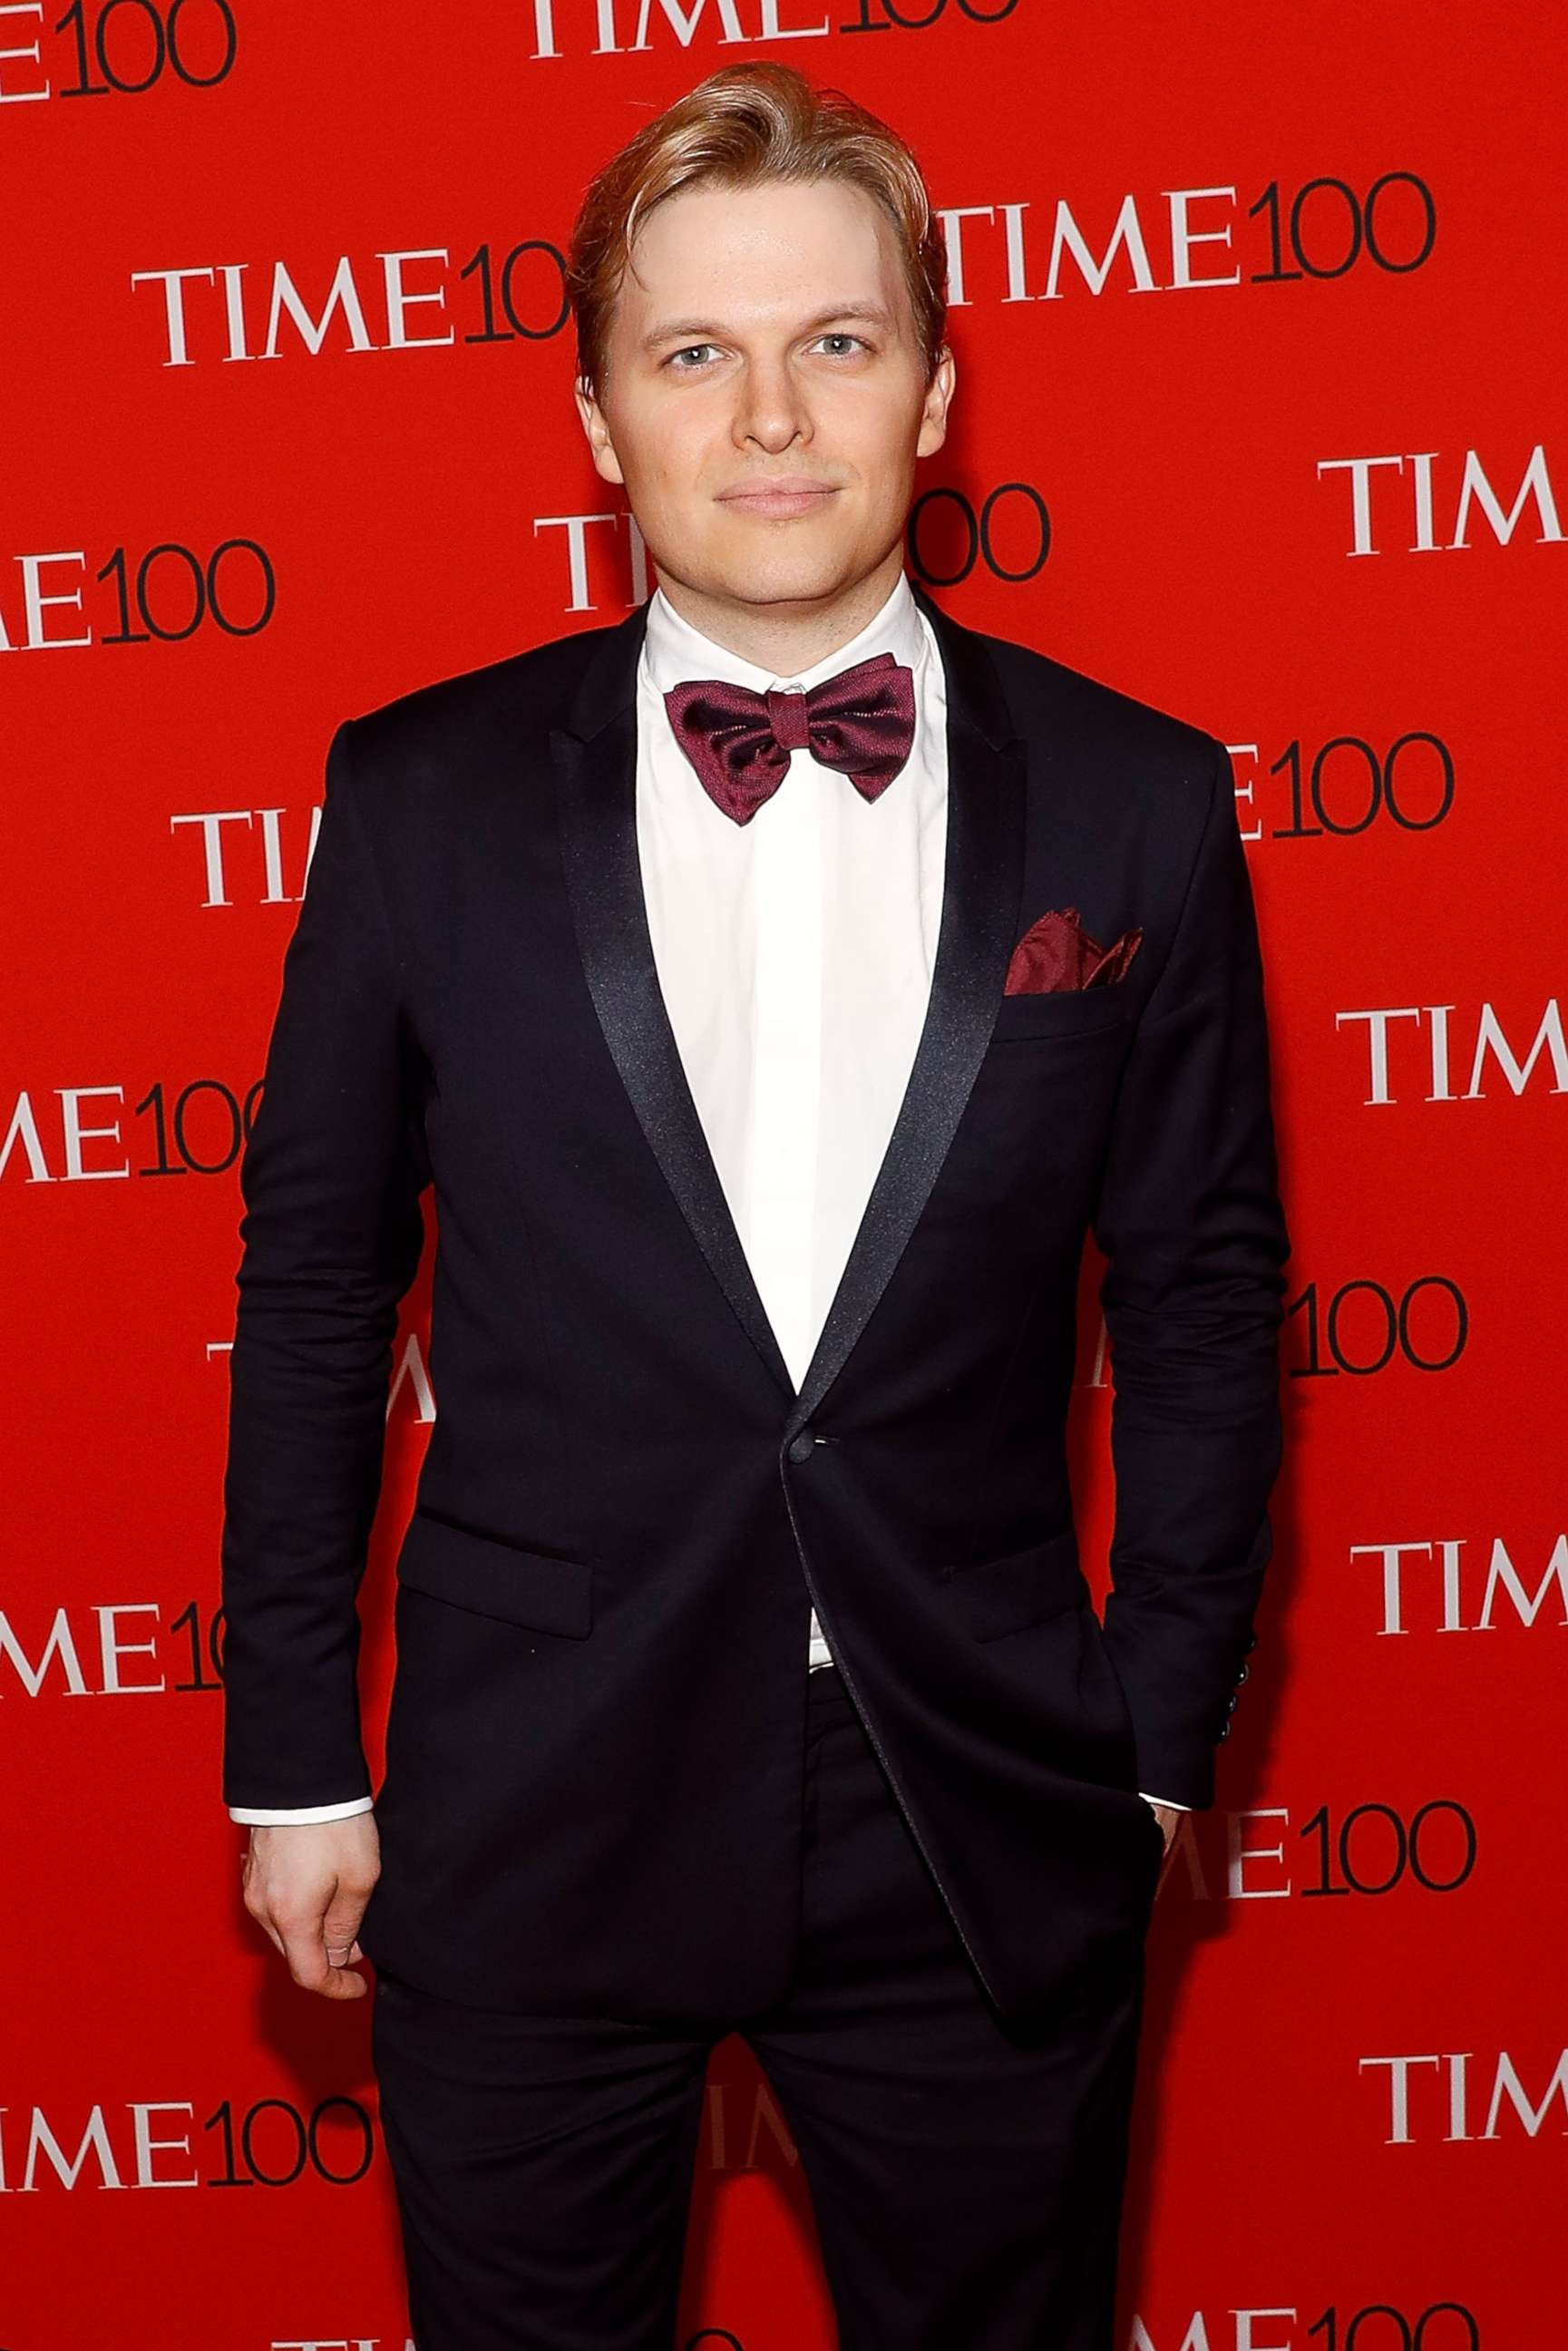 PHOTO: Ronan Farrow attends the 2017 Time 100 Gala at Jazz at Lincoln Center, April 25, 2017, in New York.  